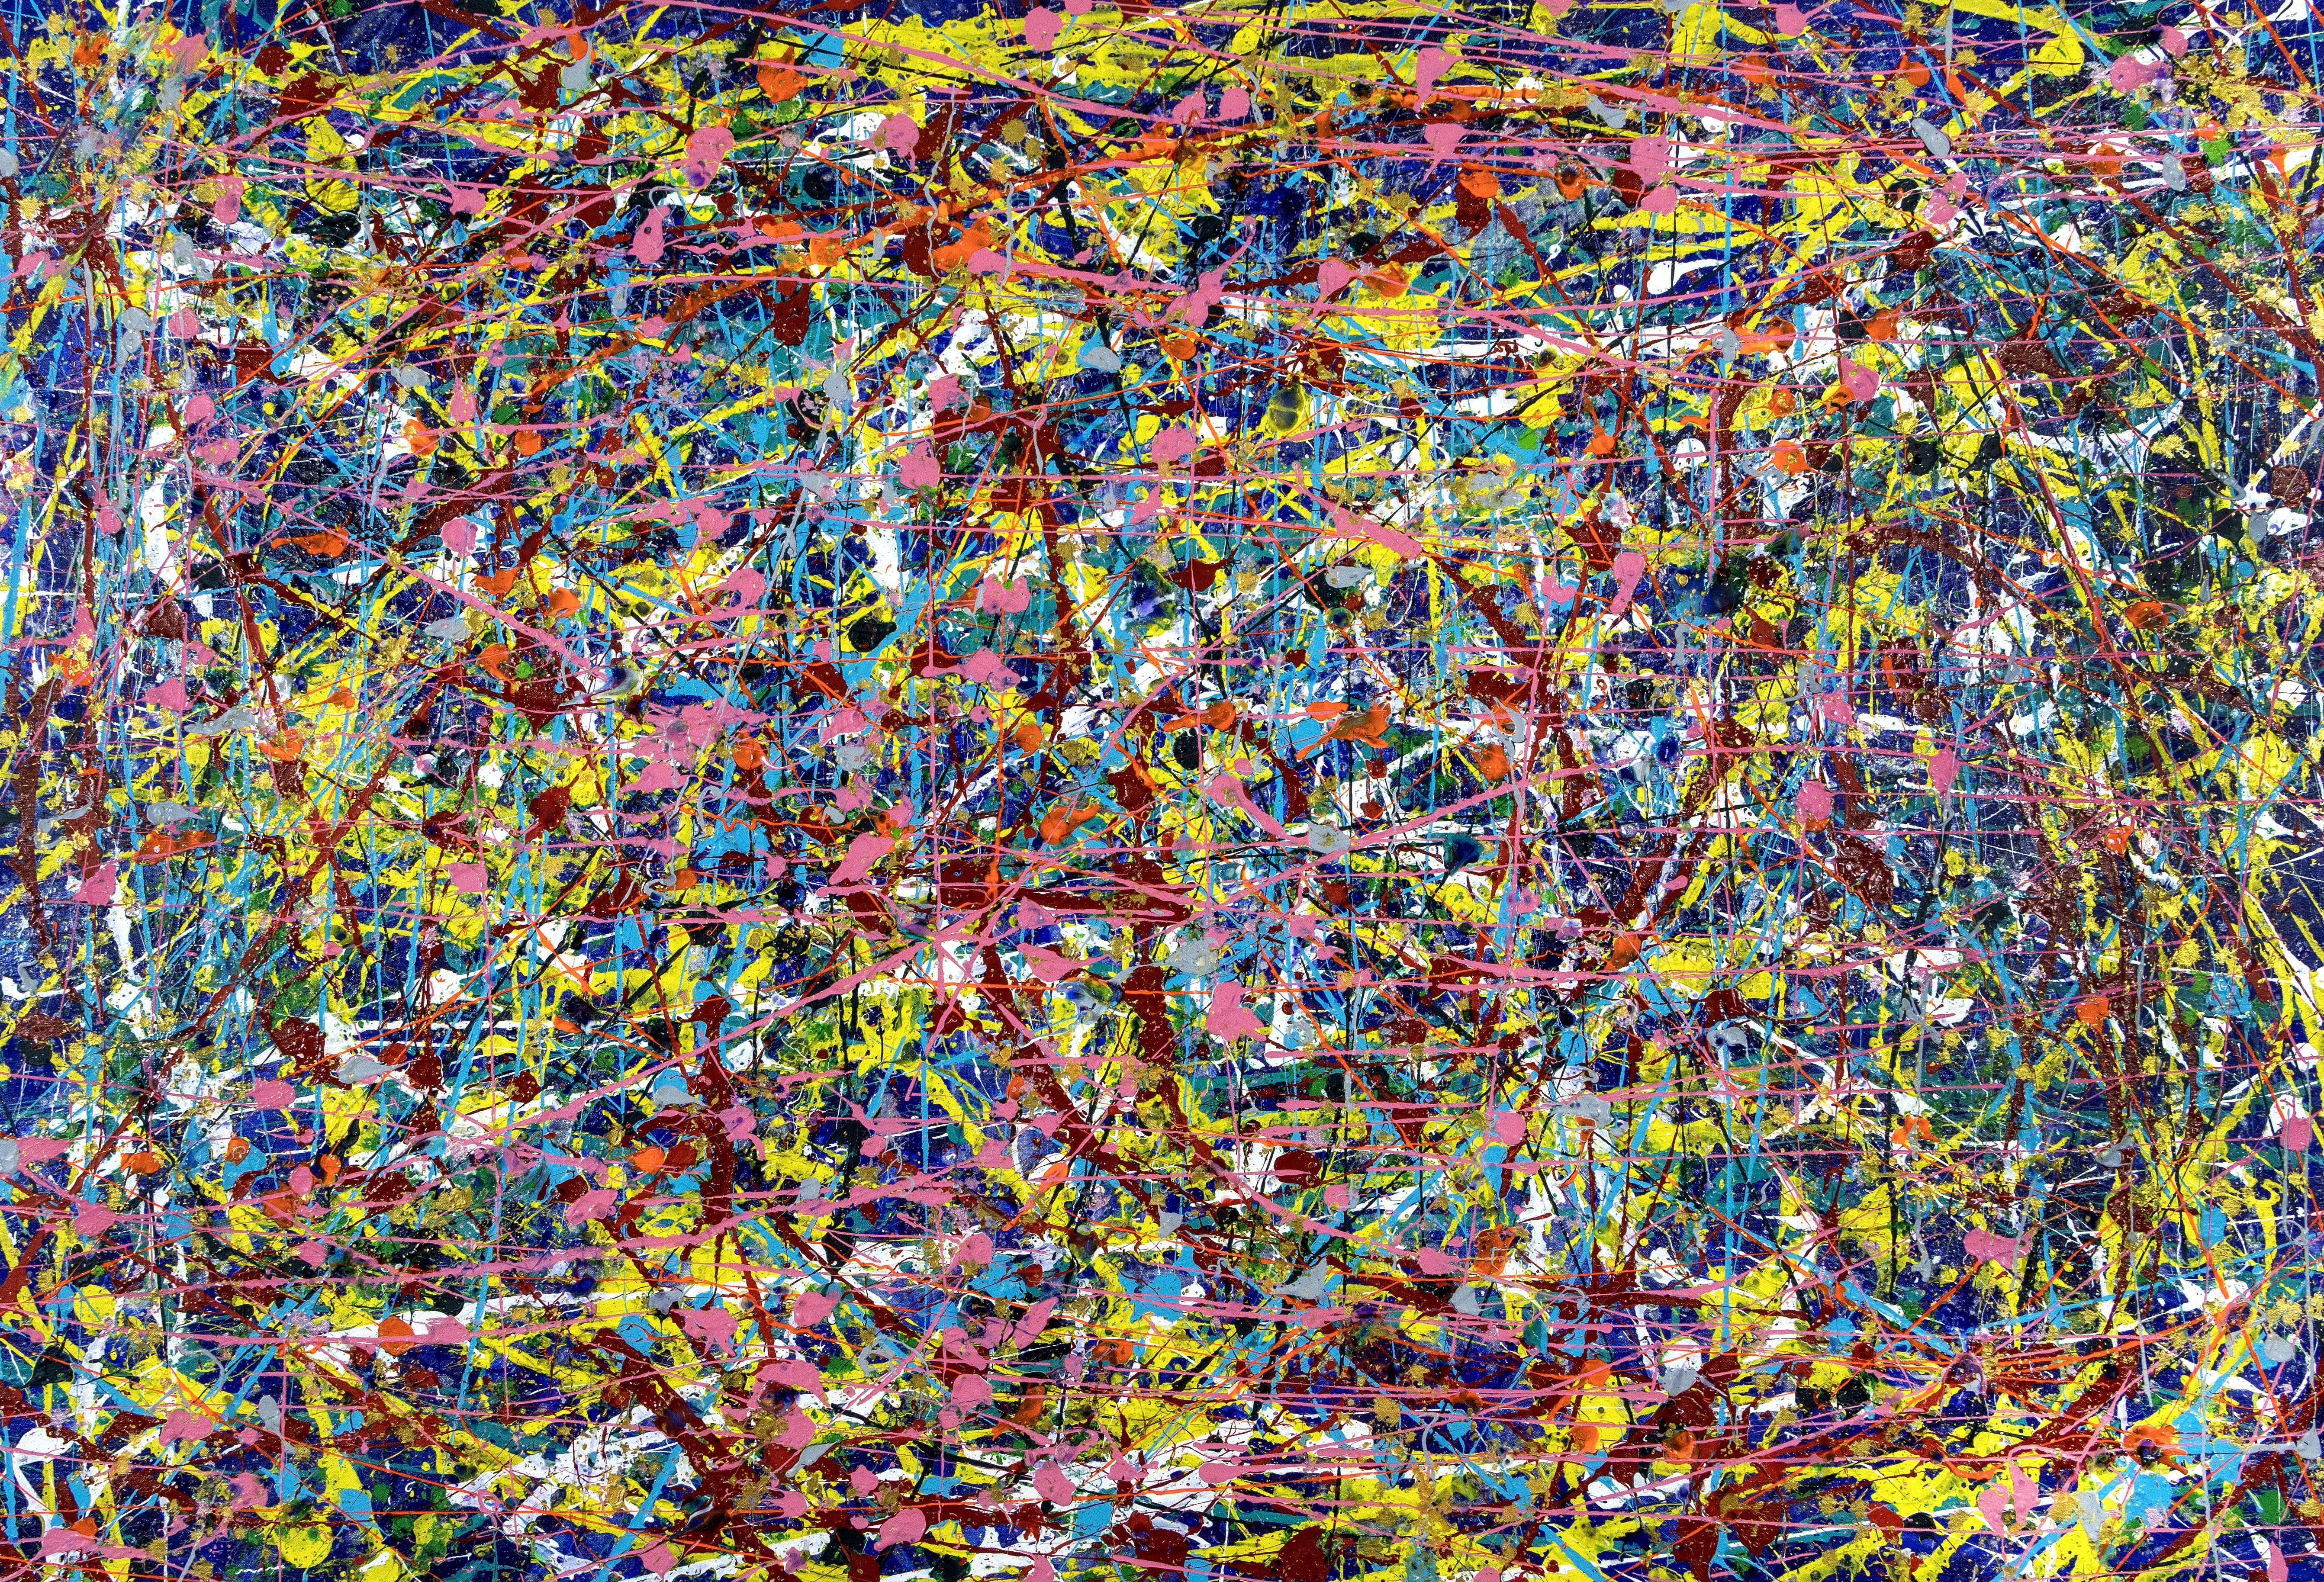 Passionate multi-color action abstract painting inspired by Pollock. Many layers of paint including Purple, yellow, red, blue, white, silver, pink, teal... Large statement artwork. Signed on request, can be display in multiple orientations.     